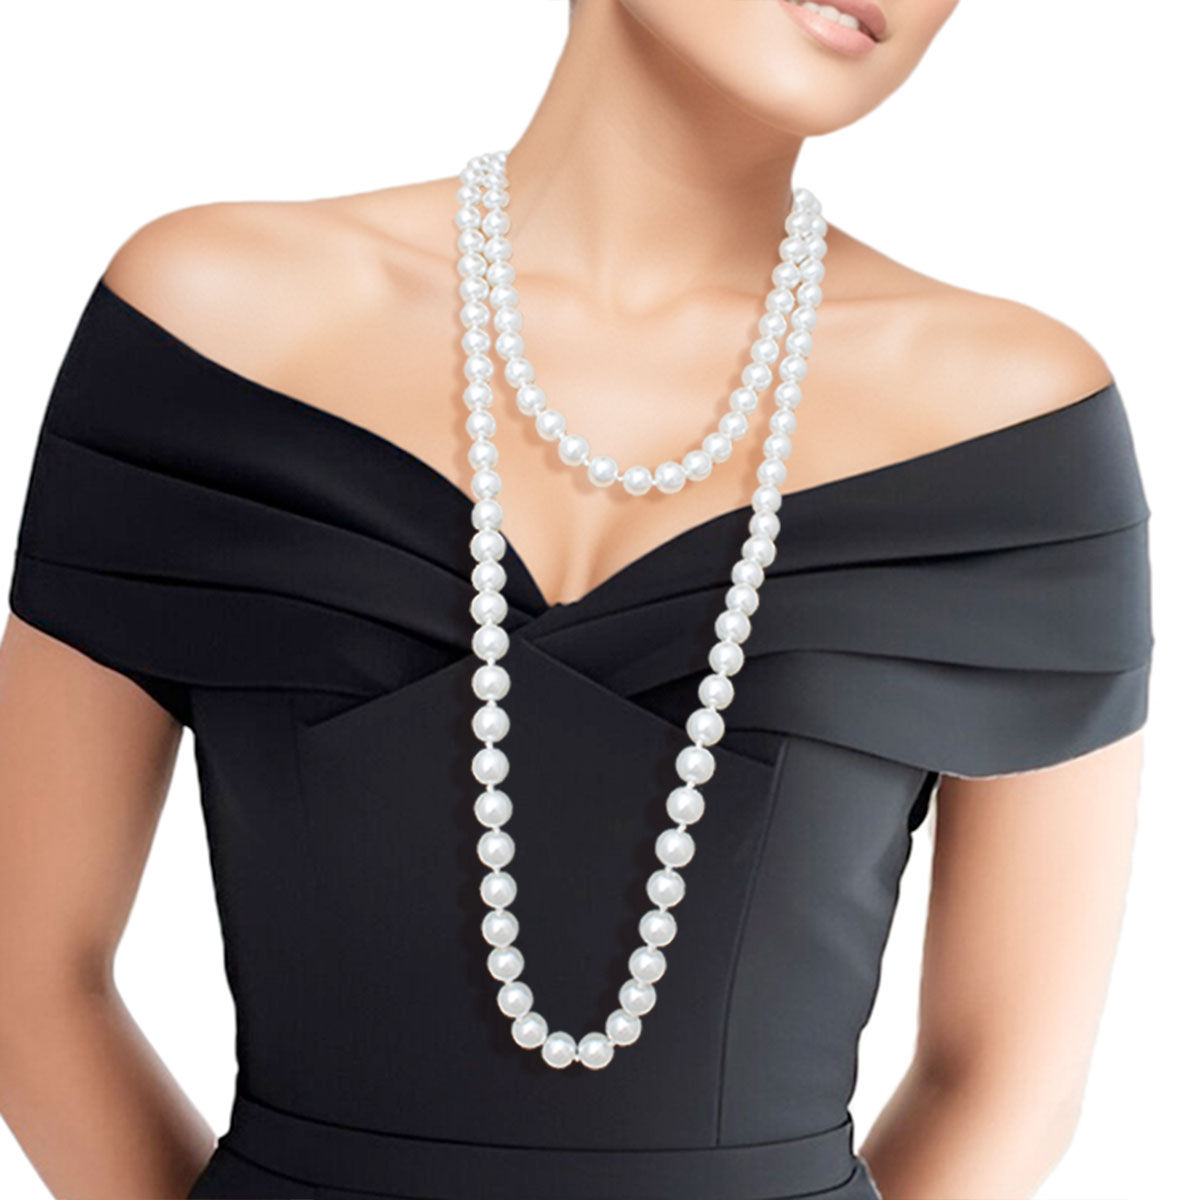 Necklace White Glass 12mm Pearls for Women